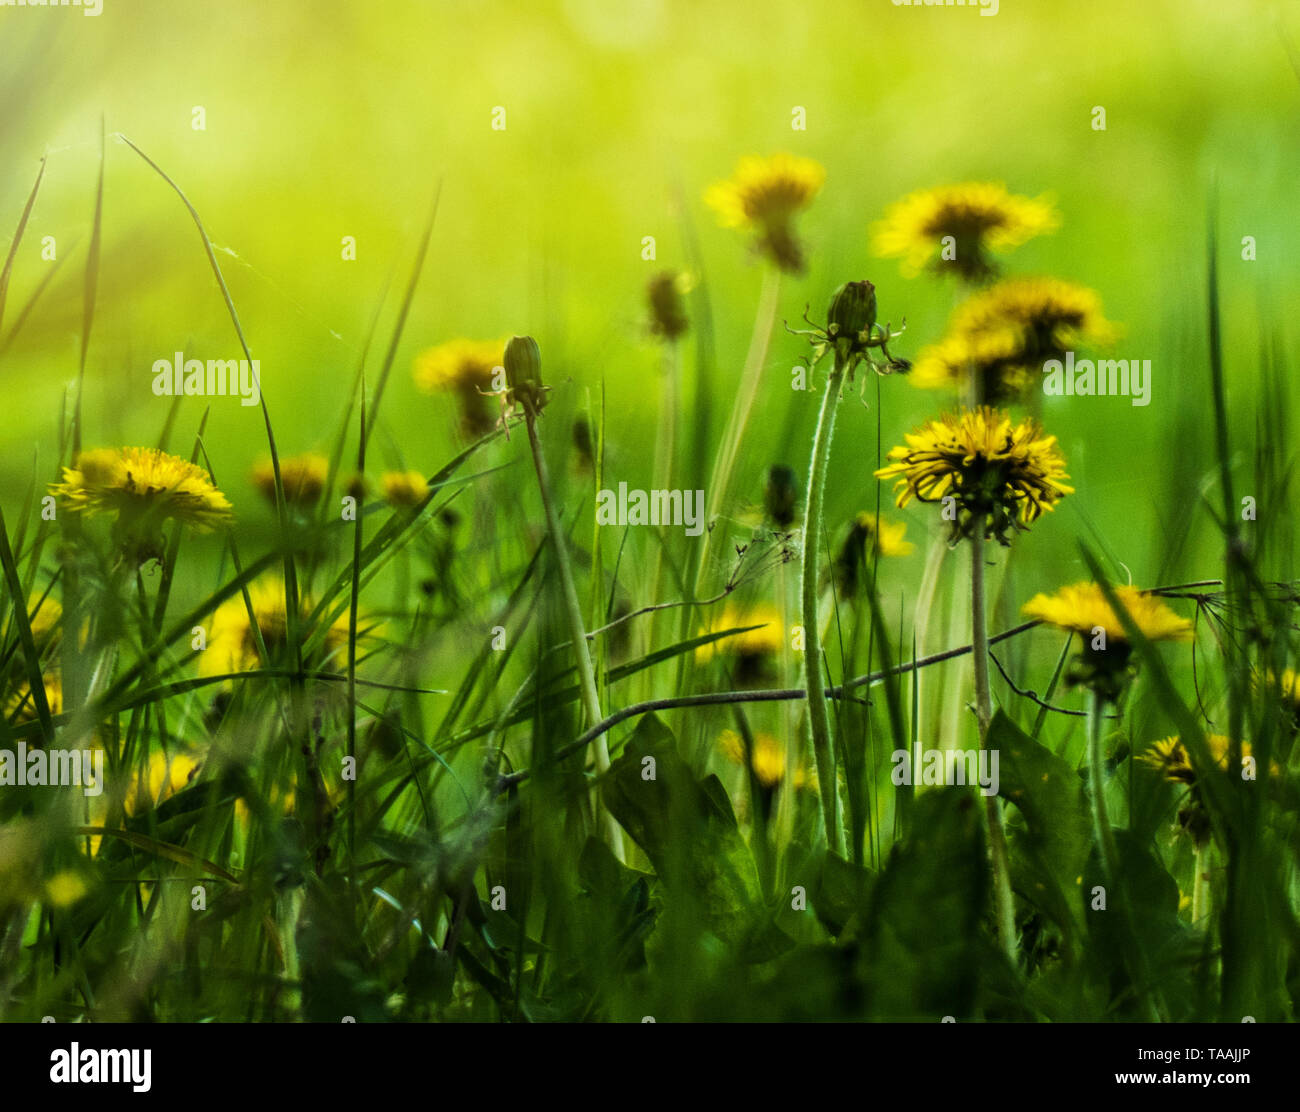 Dandelions bloomed on the glade Stock Photo